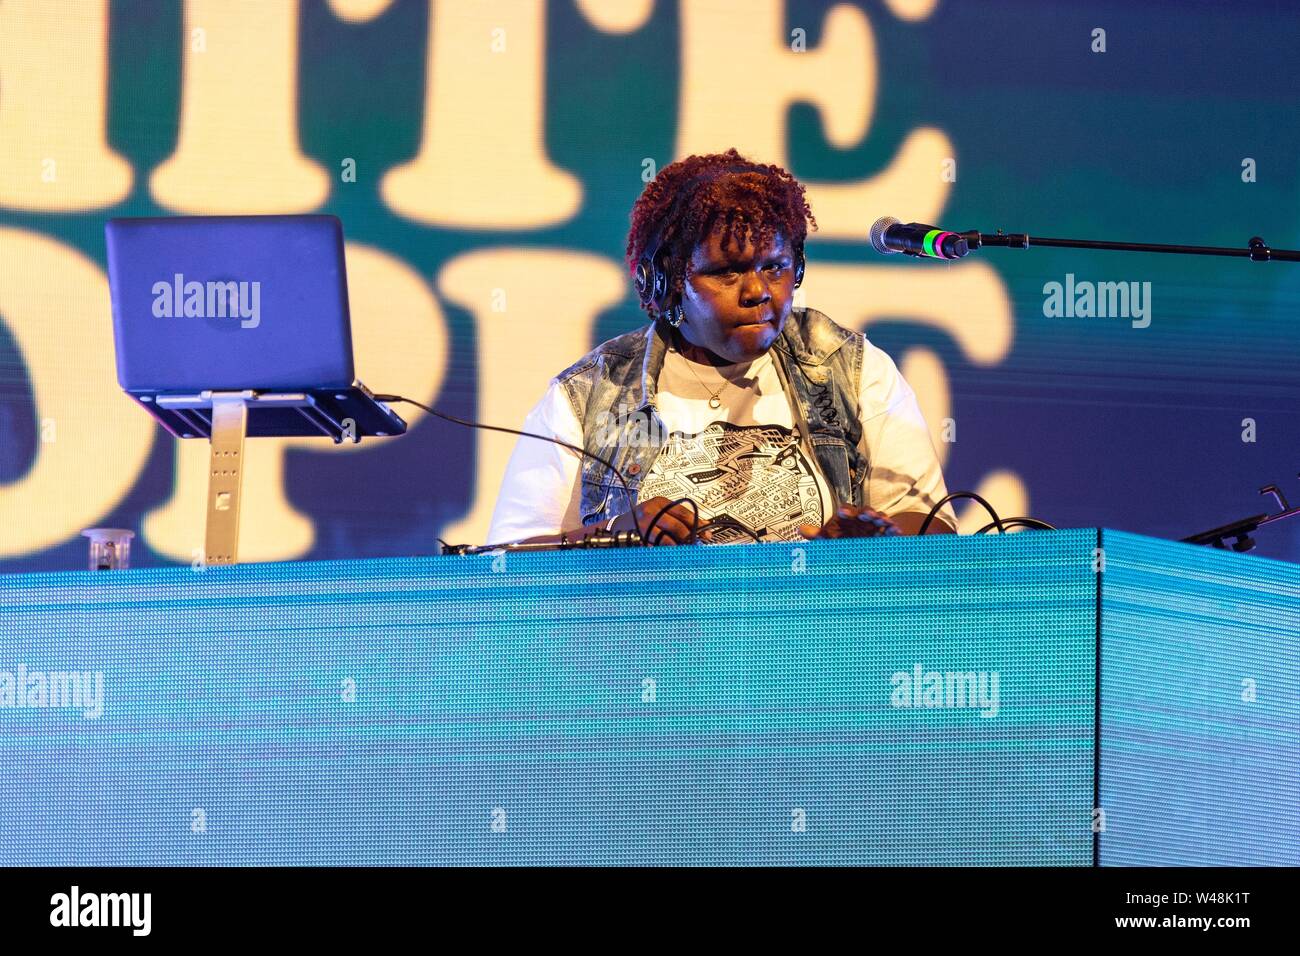 July 20, 2019 - Twin Lakes, Wisconsin, U.S - DJ CUT CUZ during  ComplexCon at McCormick Place in Chicago, Illinois (Credit Image: © Daniel DeSlover/ZUMA Wire) Stock Photo